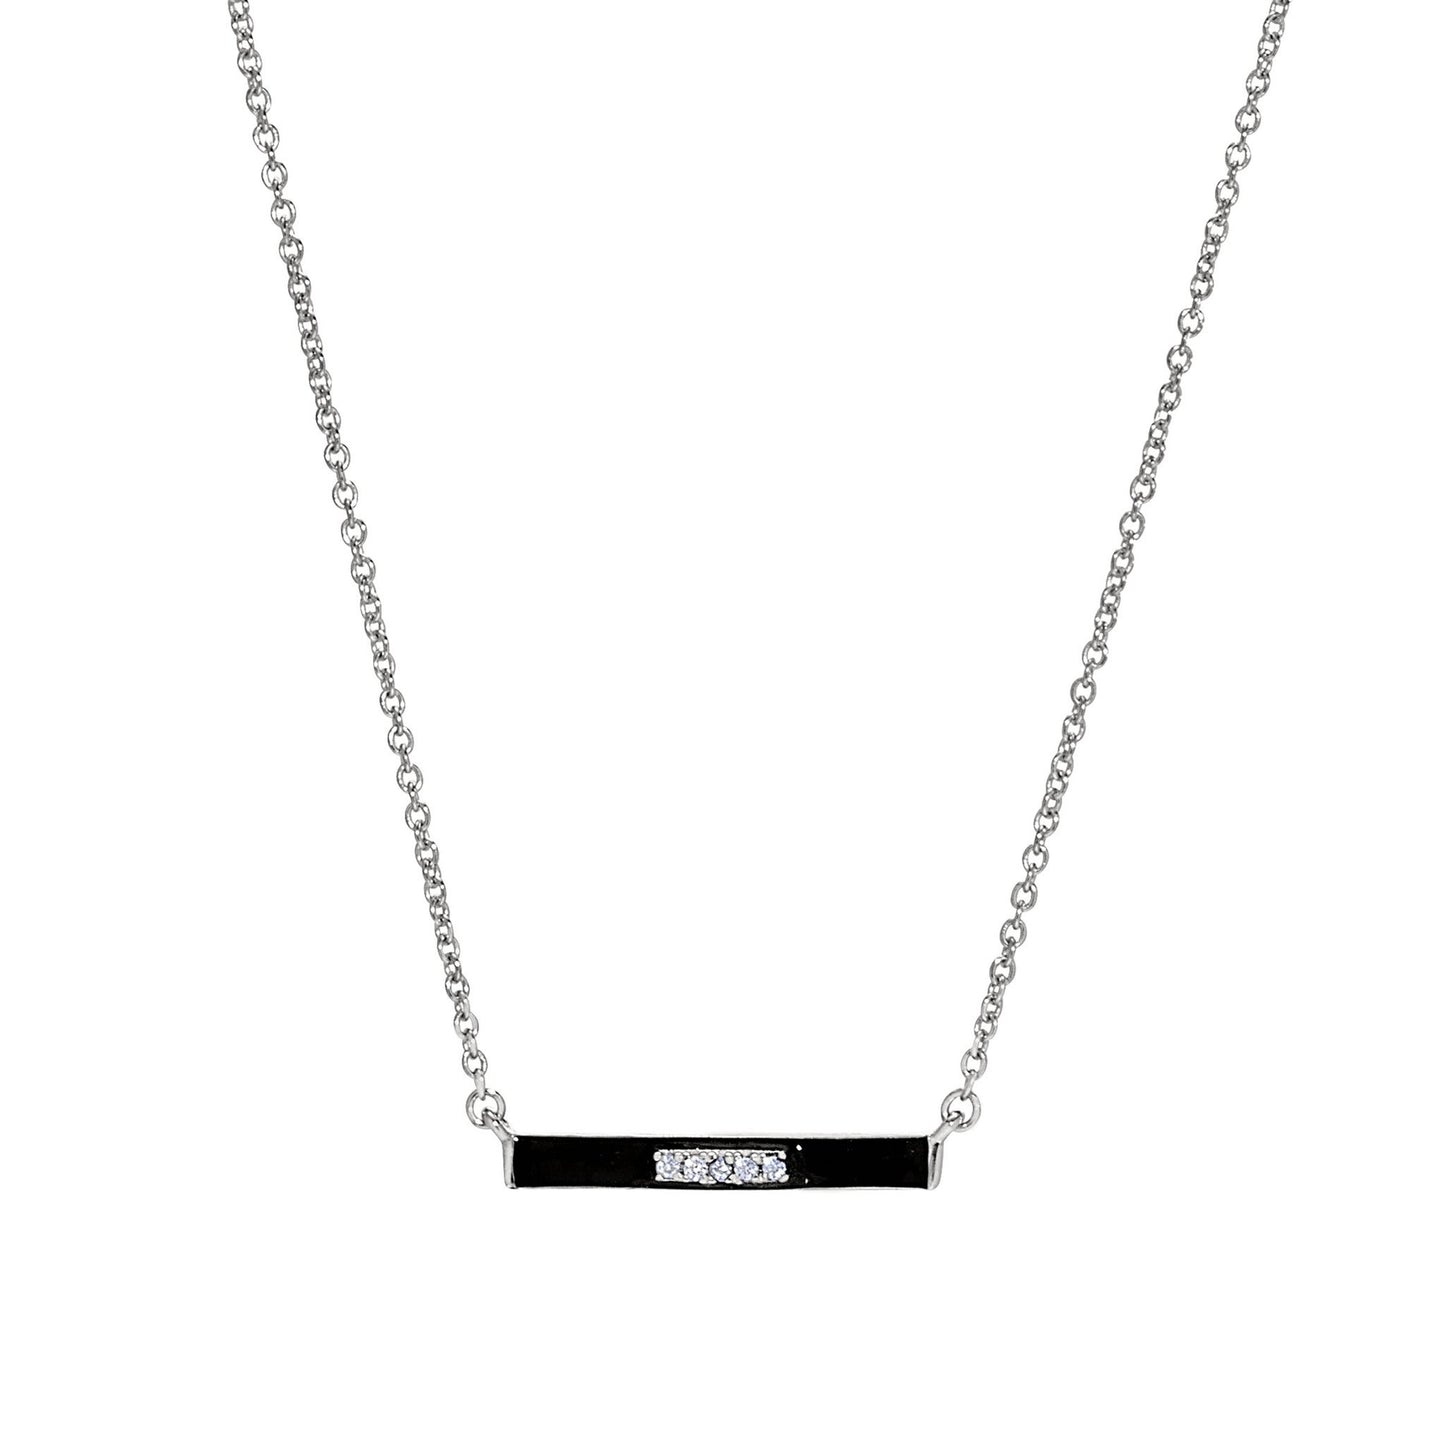 A black enamel bar necklace with simulated diamonds displayed on a neutral white background.